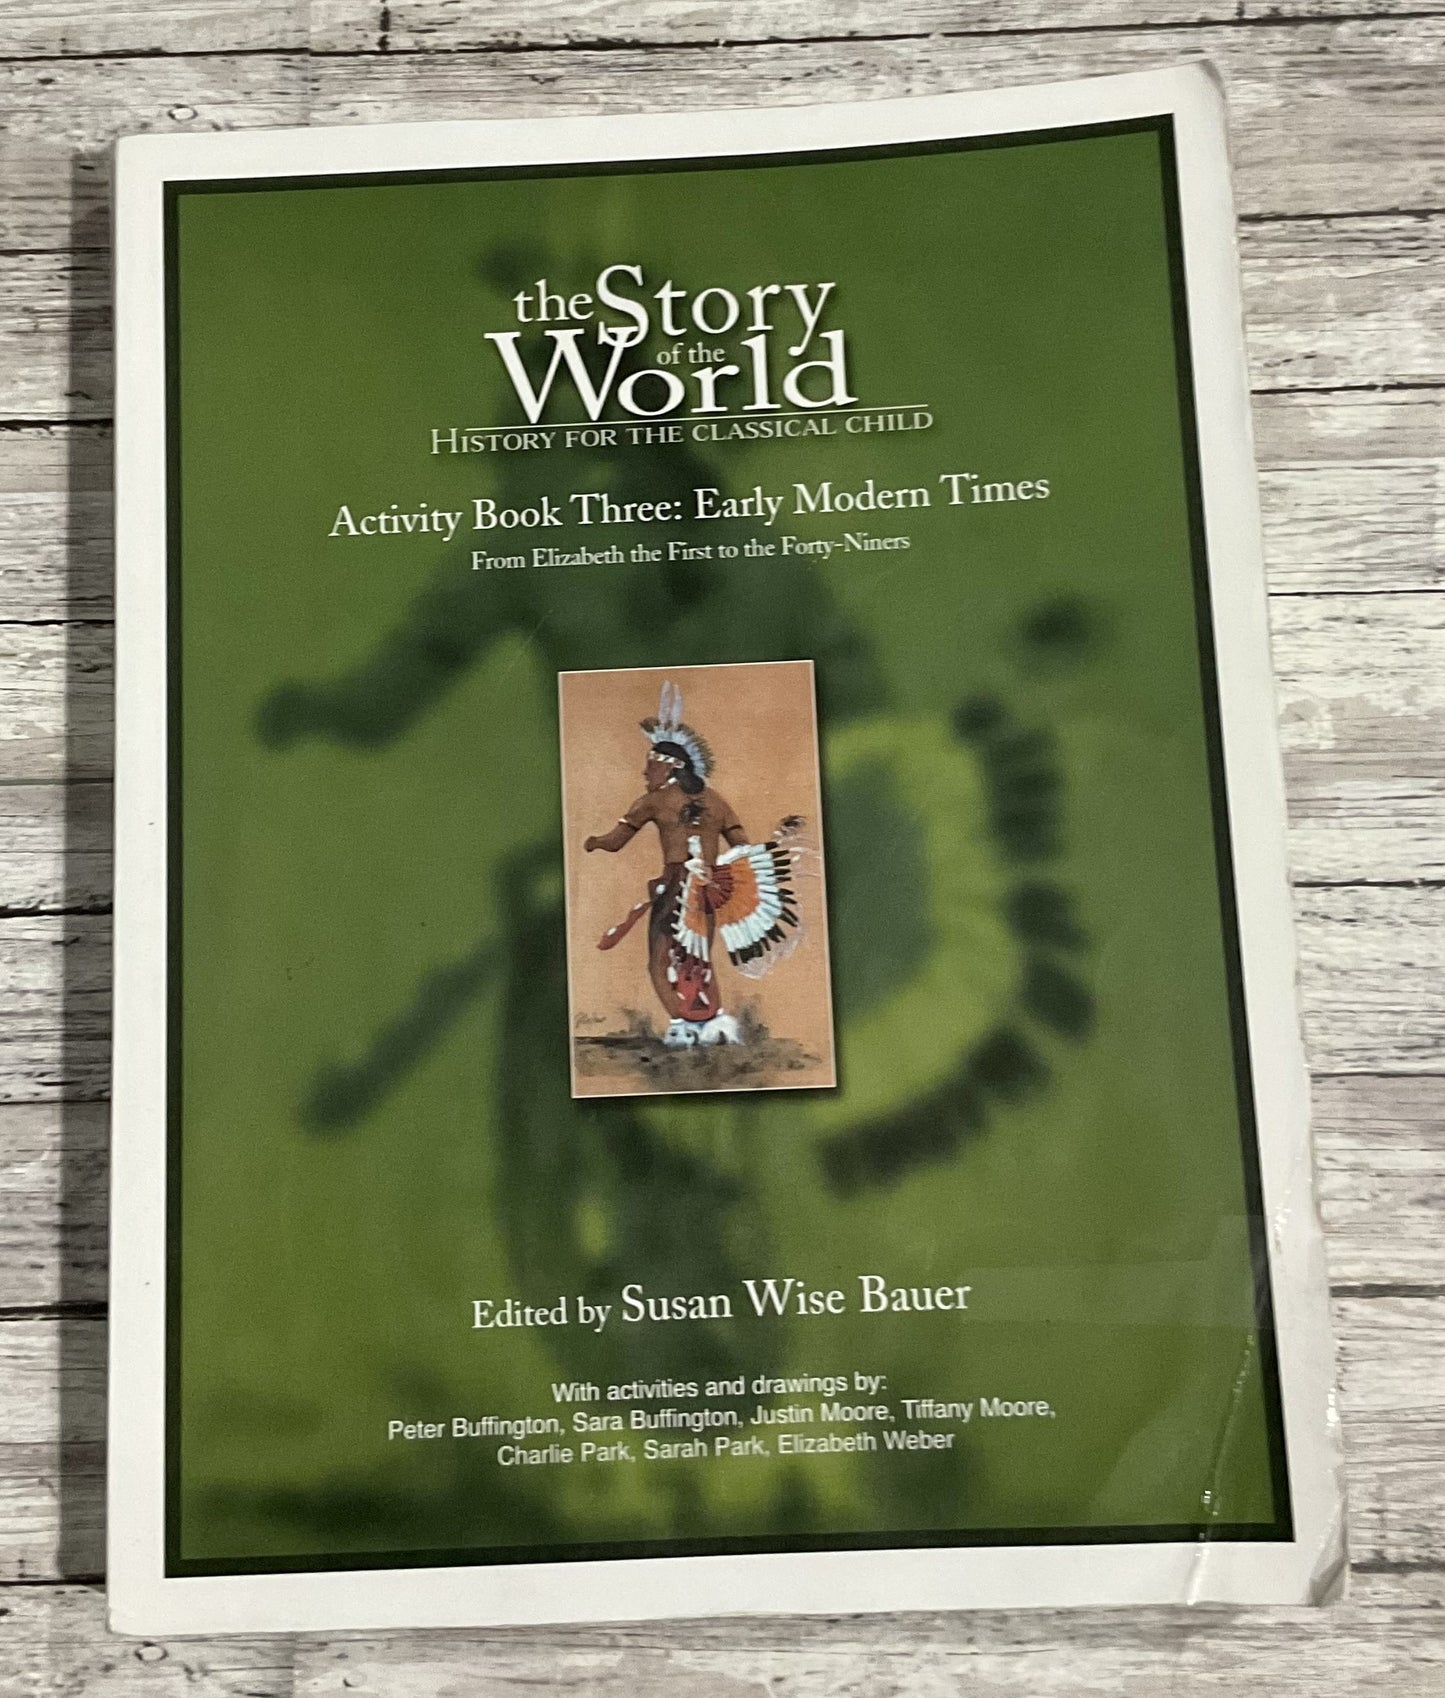 The Story of the World Activity Book Three: Early Modern Times - Anchored Homeschool Resource Center